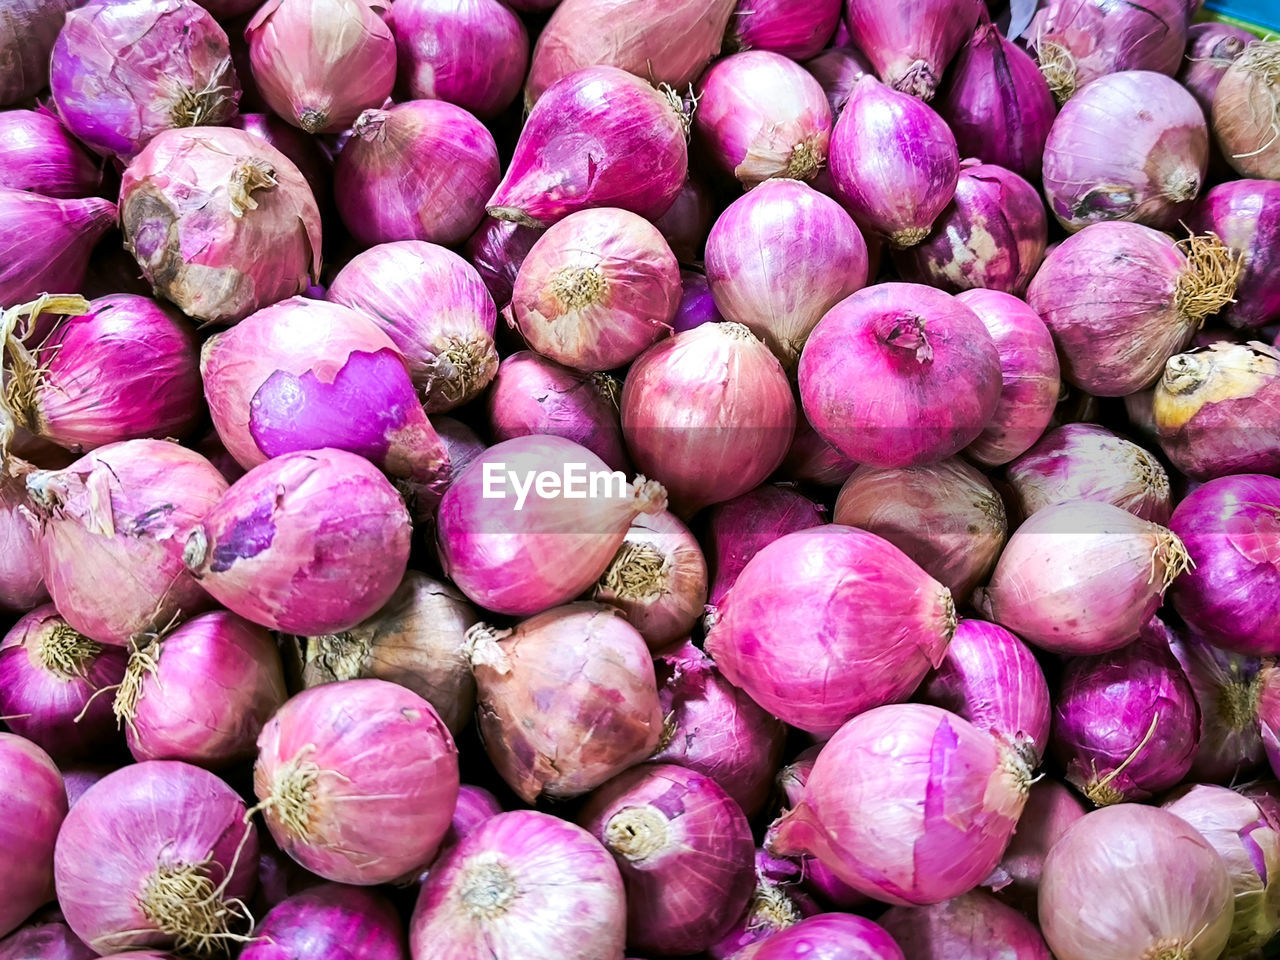 food and drink, food, freshness, vegetable, produce, wellbeing, healthy eating, large group of objects, abundance, shallot, market, plant, for sale, no people, pink, full frame, still life, red onion, onion, retail, backgrounds, close-up, market stall, raw food, high angle view, day, organic, root vegetable, purple, heap, business, repetition